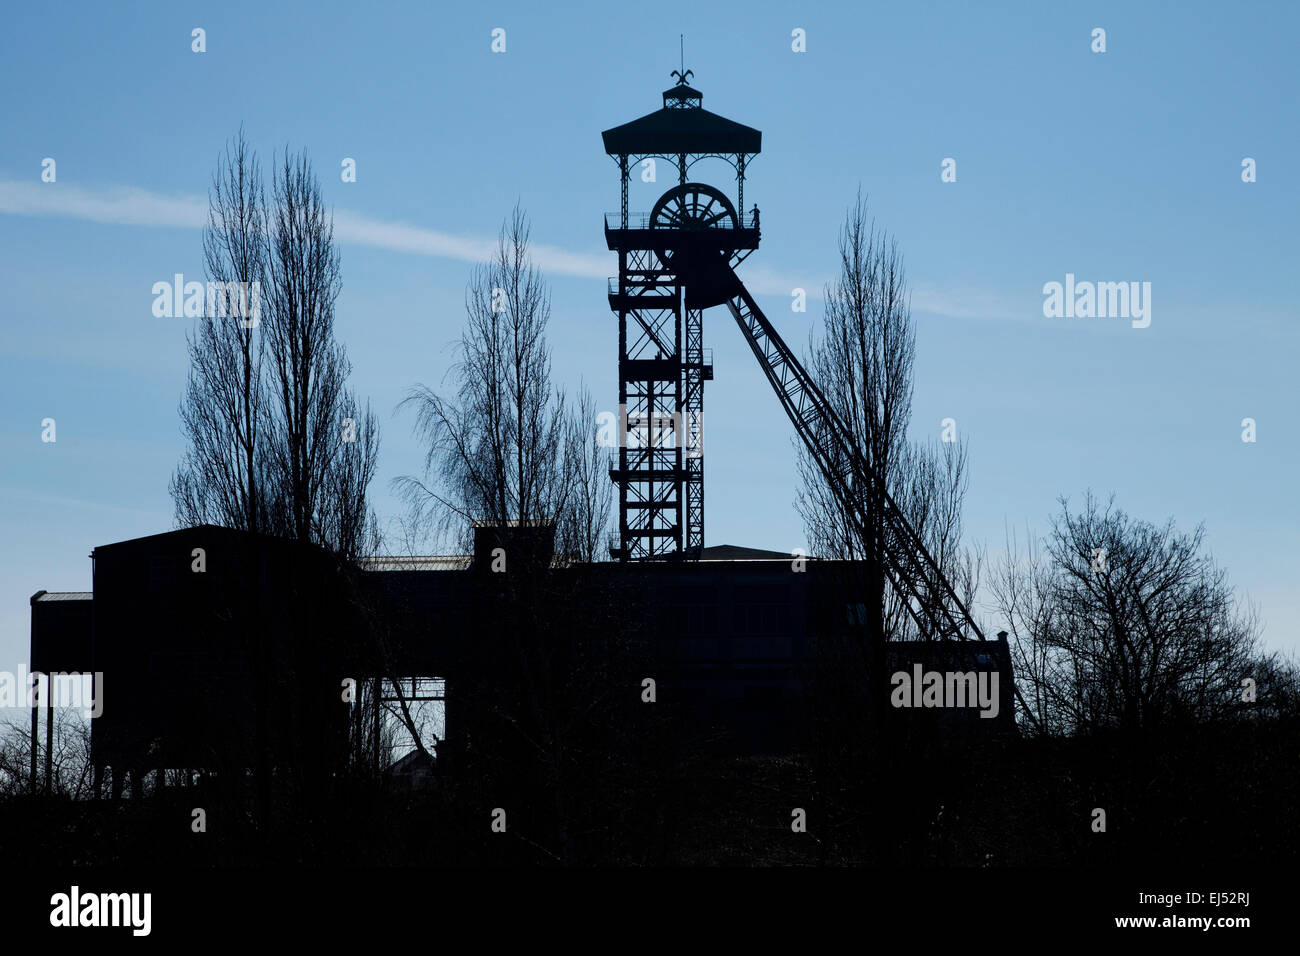 The 11/19 pit and twin slag heaps in Lens (France) or residues left over from the coal extraction process. Stock Photo